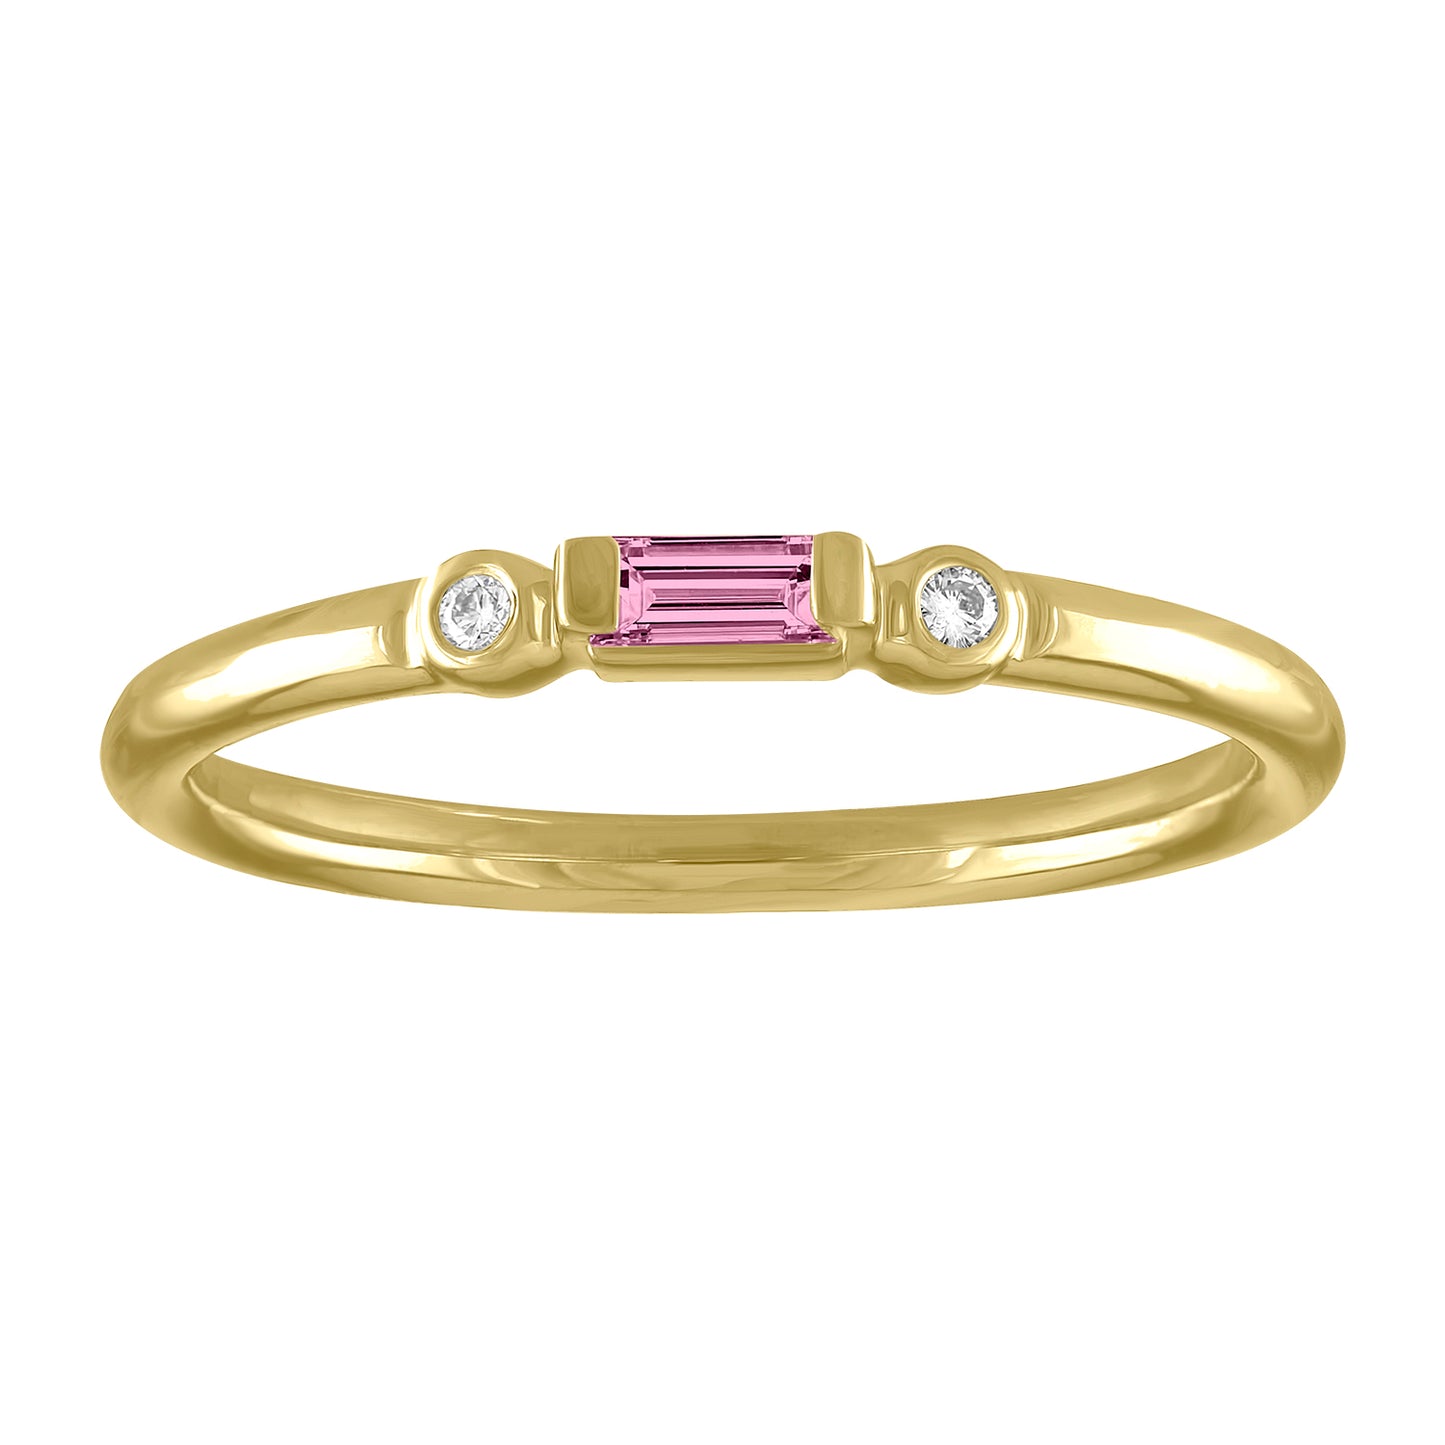 Yellow gold skinny band with a pink tourmaline baguette in the center and two round diamonds on the side. 